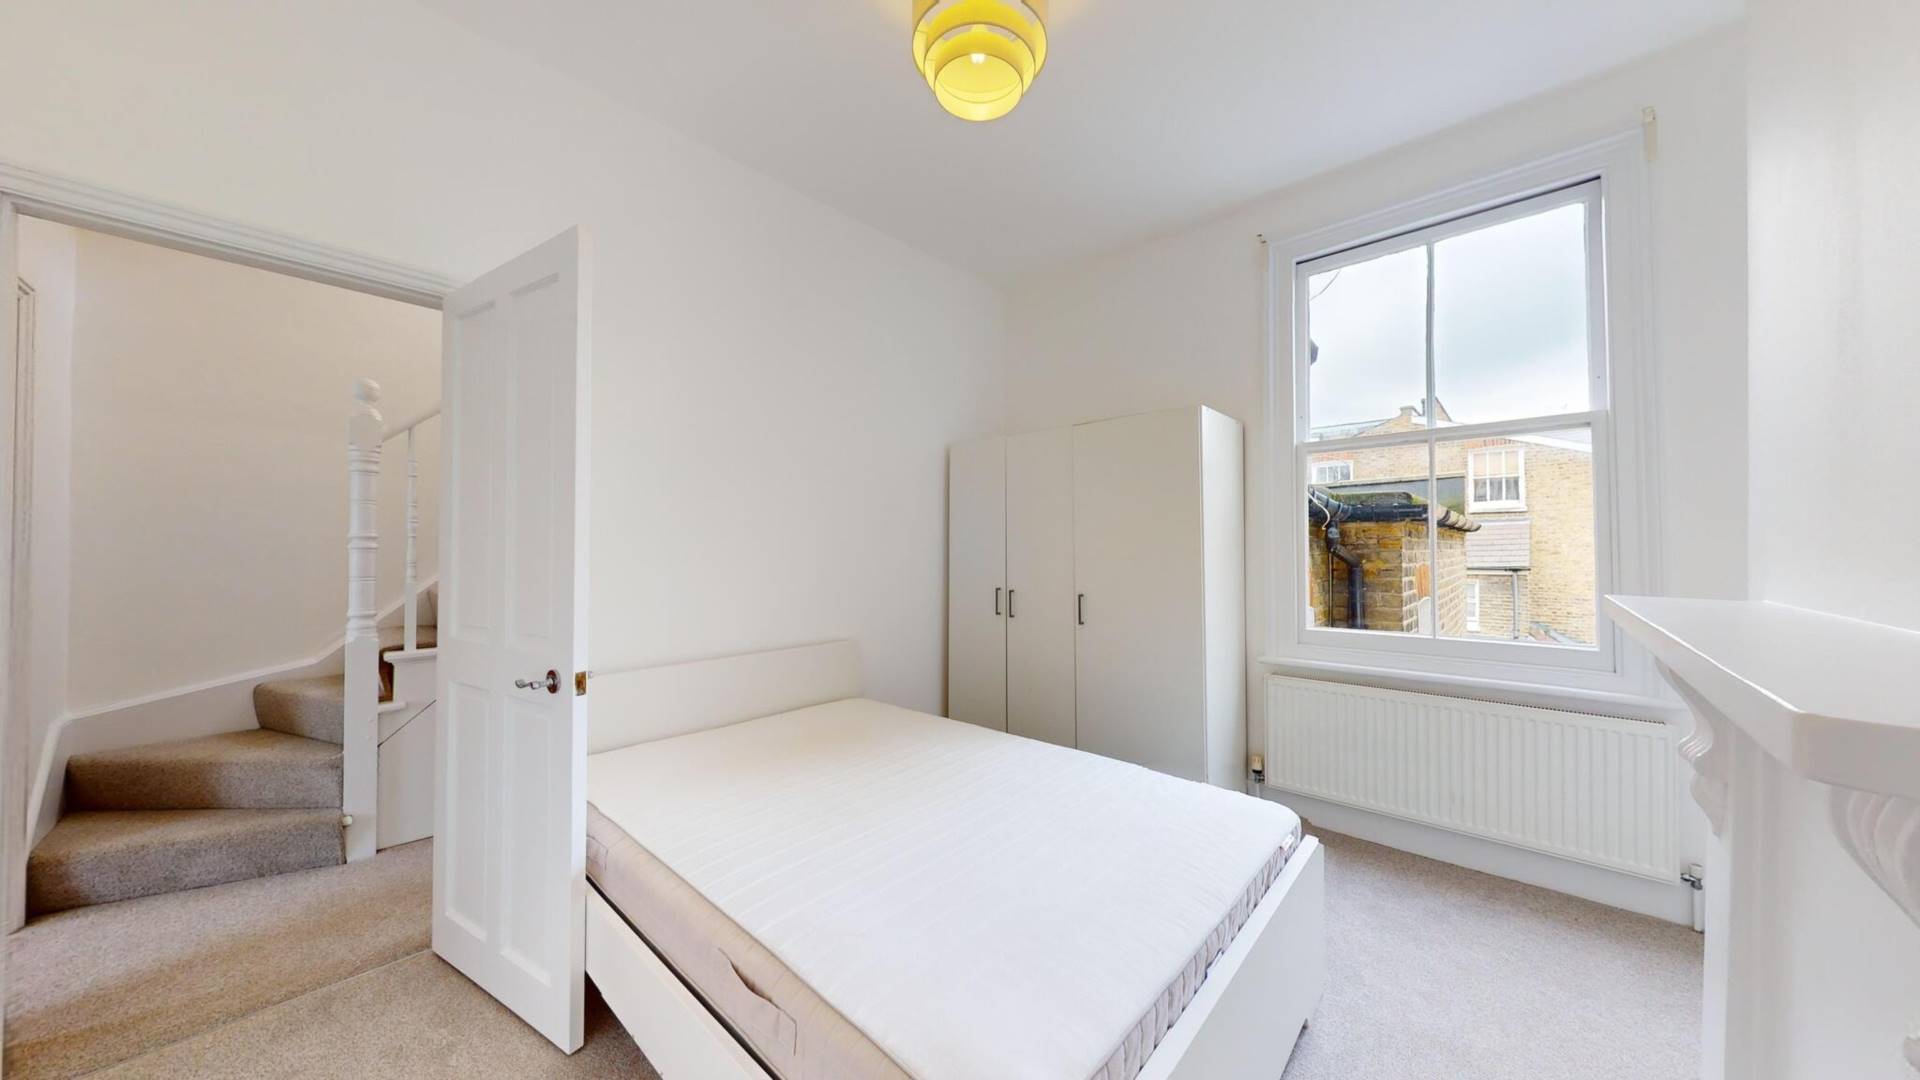 4 bed house, Fabian Road SW6, Image 10